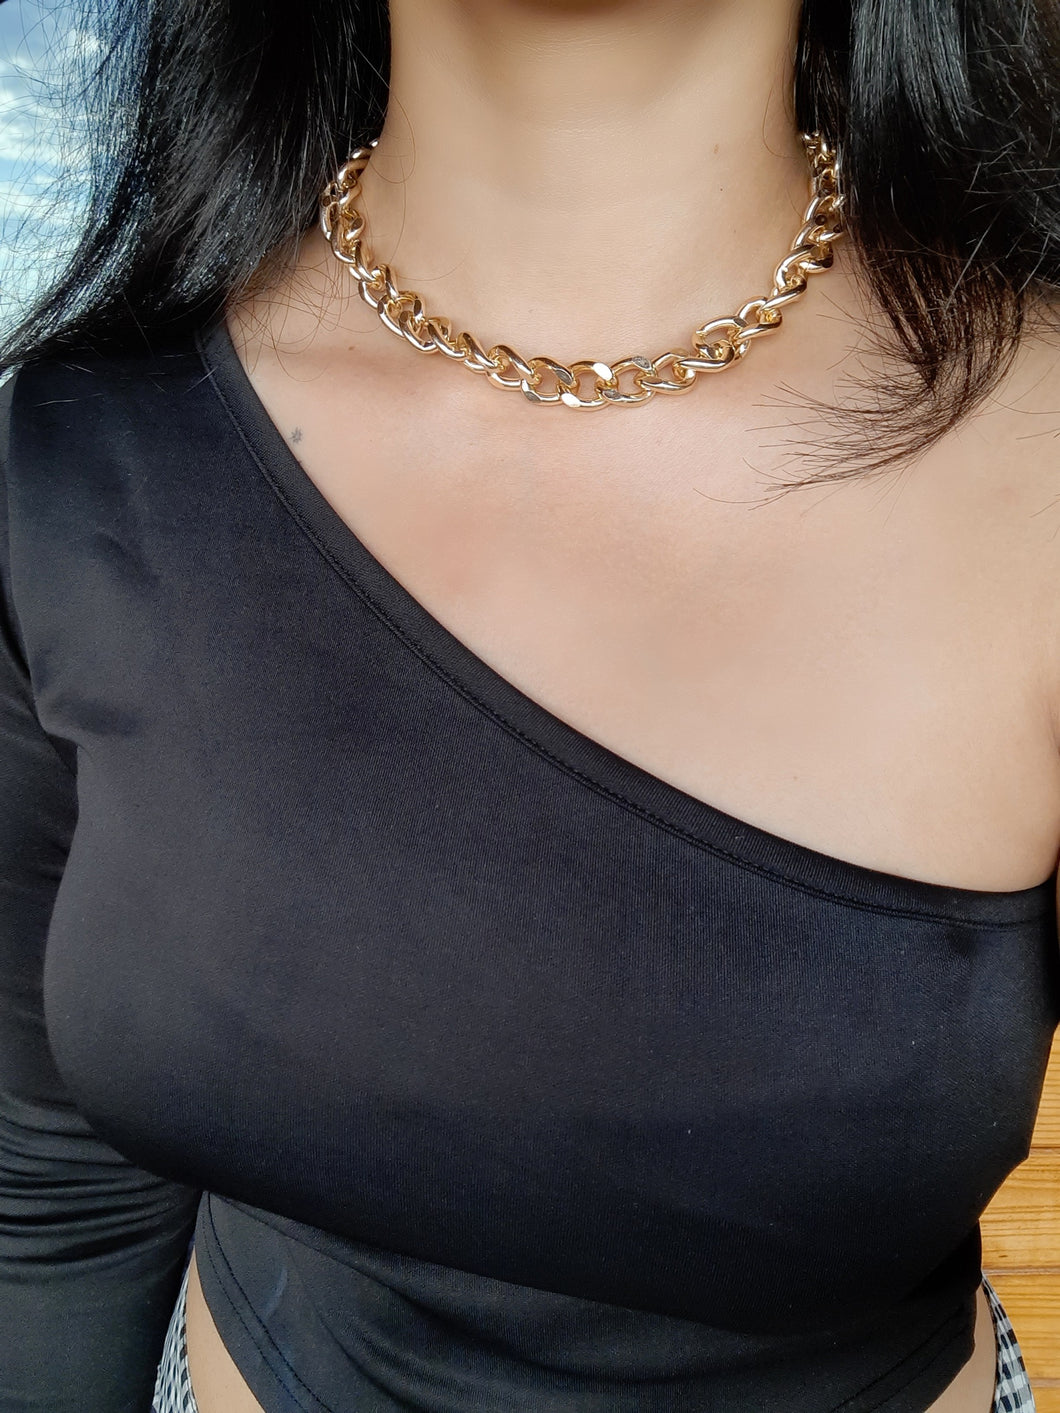 Oh-So Stylish Chain Link Necklace